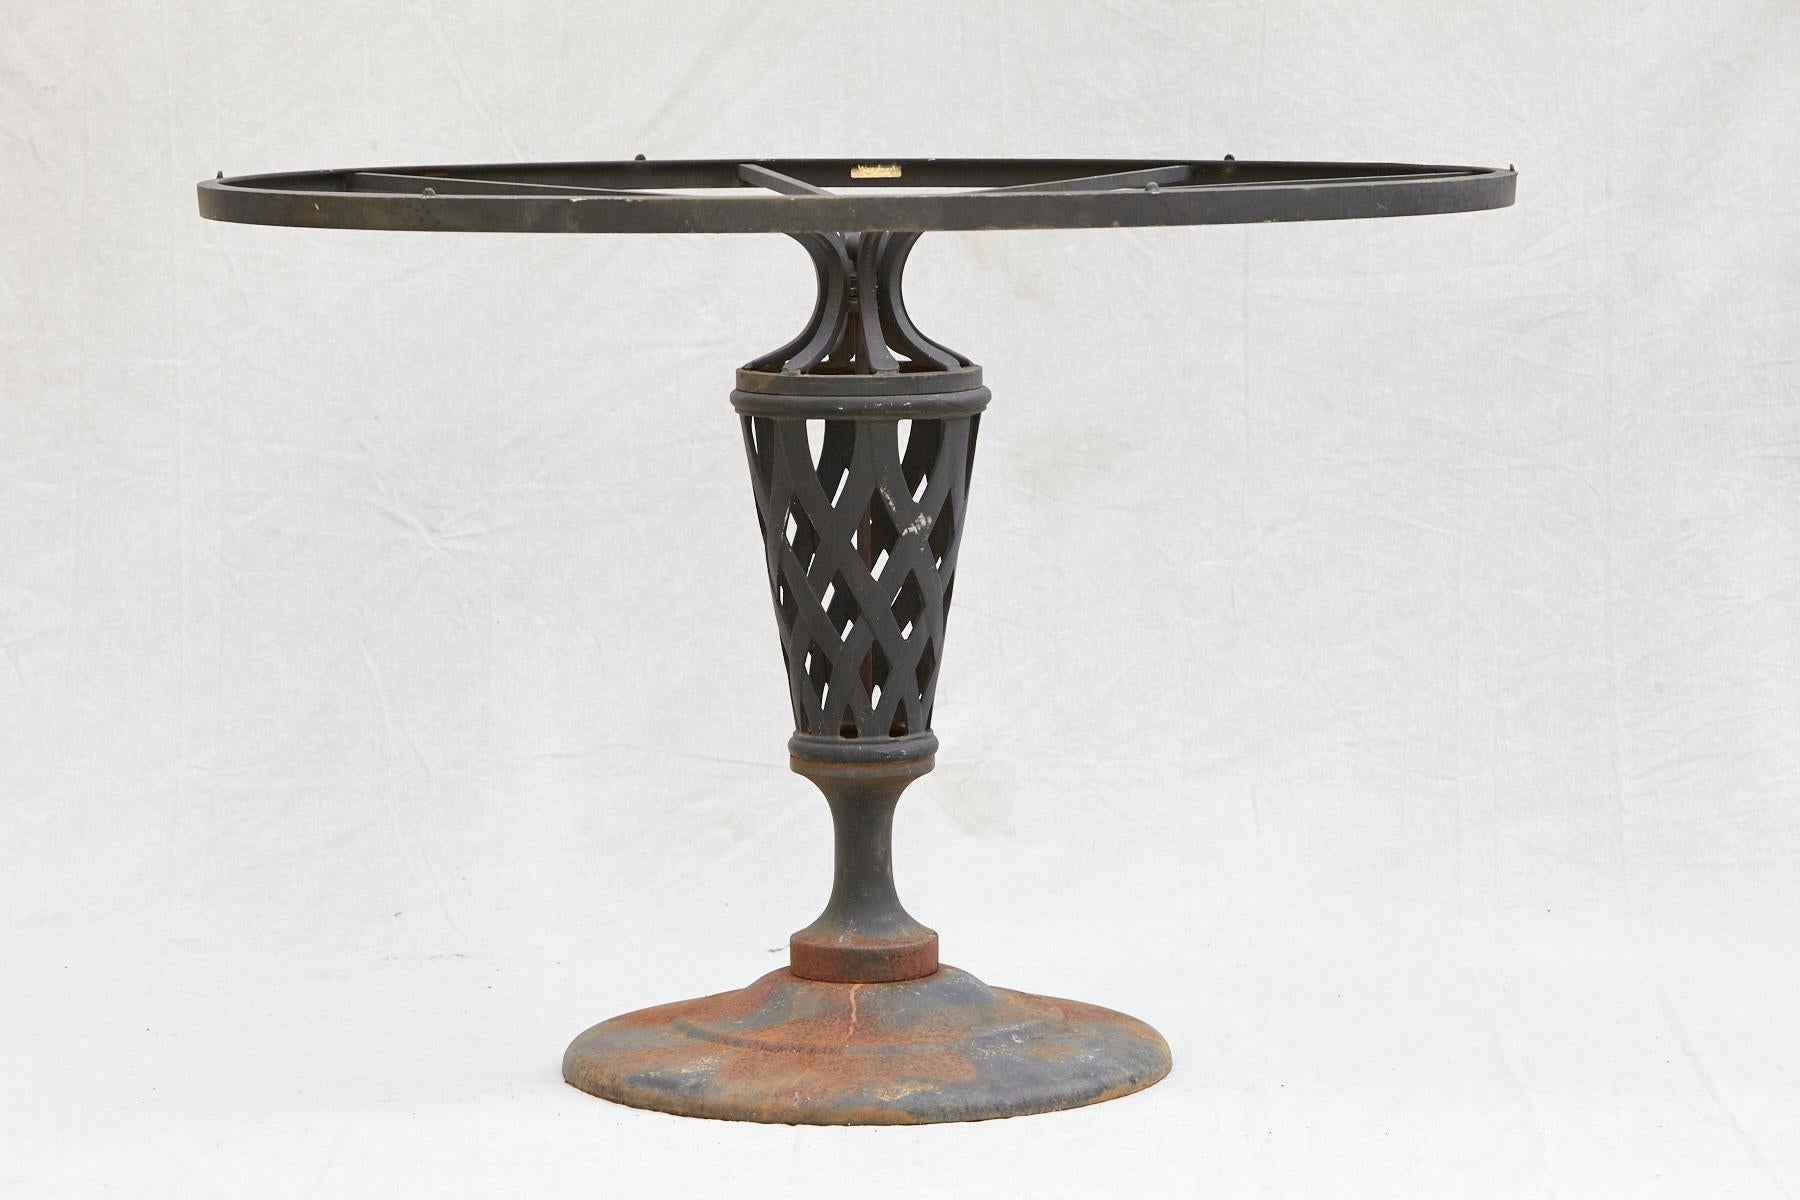 Woodard black iron garden/center table on a pedestal with a lattice pattern, 1980s
The table has some paint loss and rust, which gives it a charming patina.
Woodard sticker inside of the table frame visible.
  